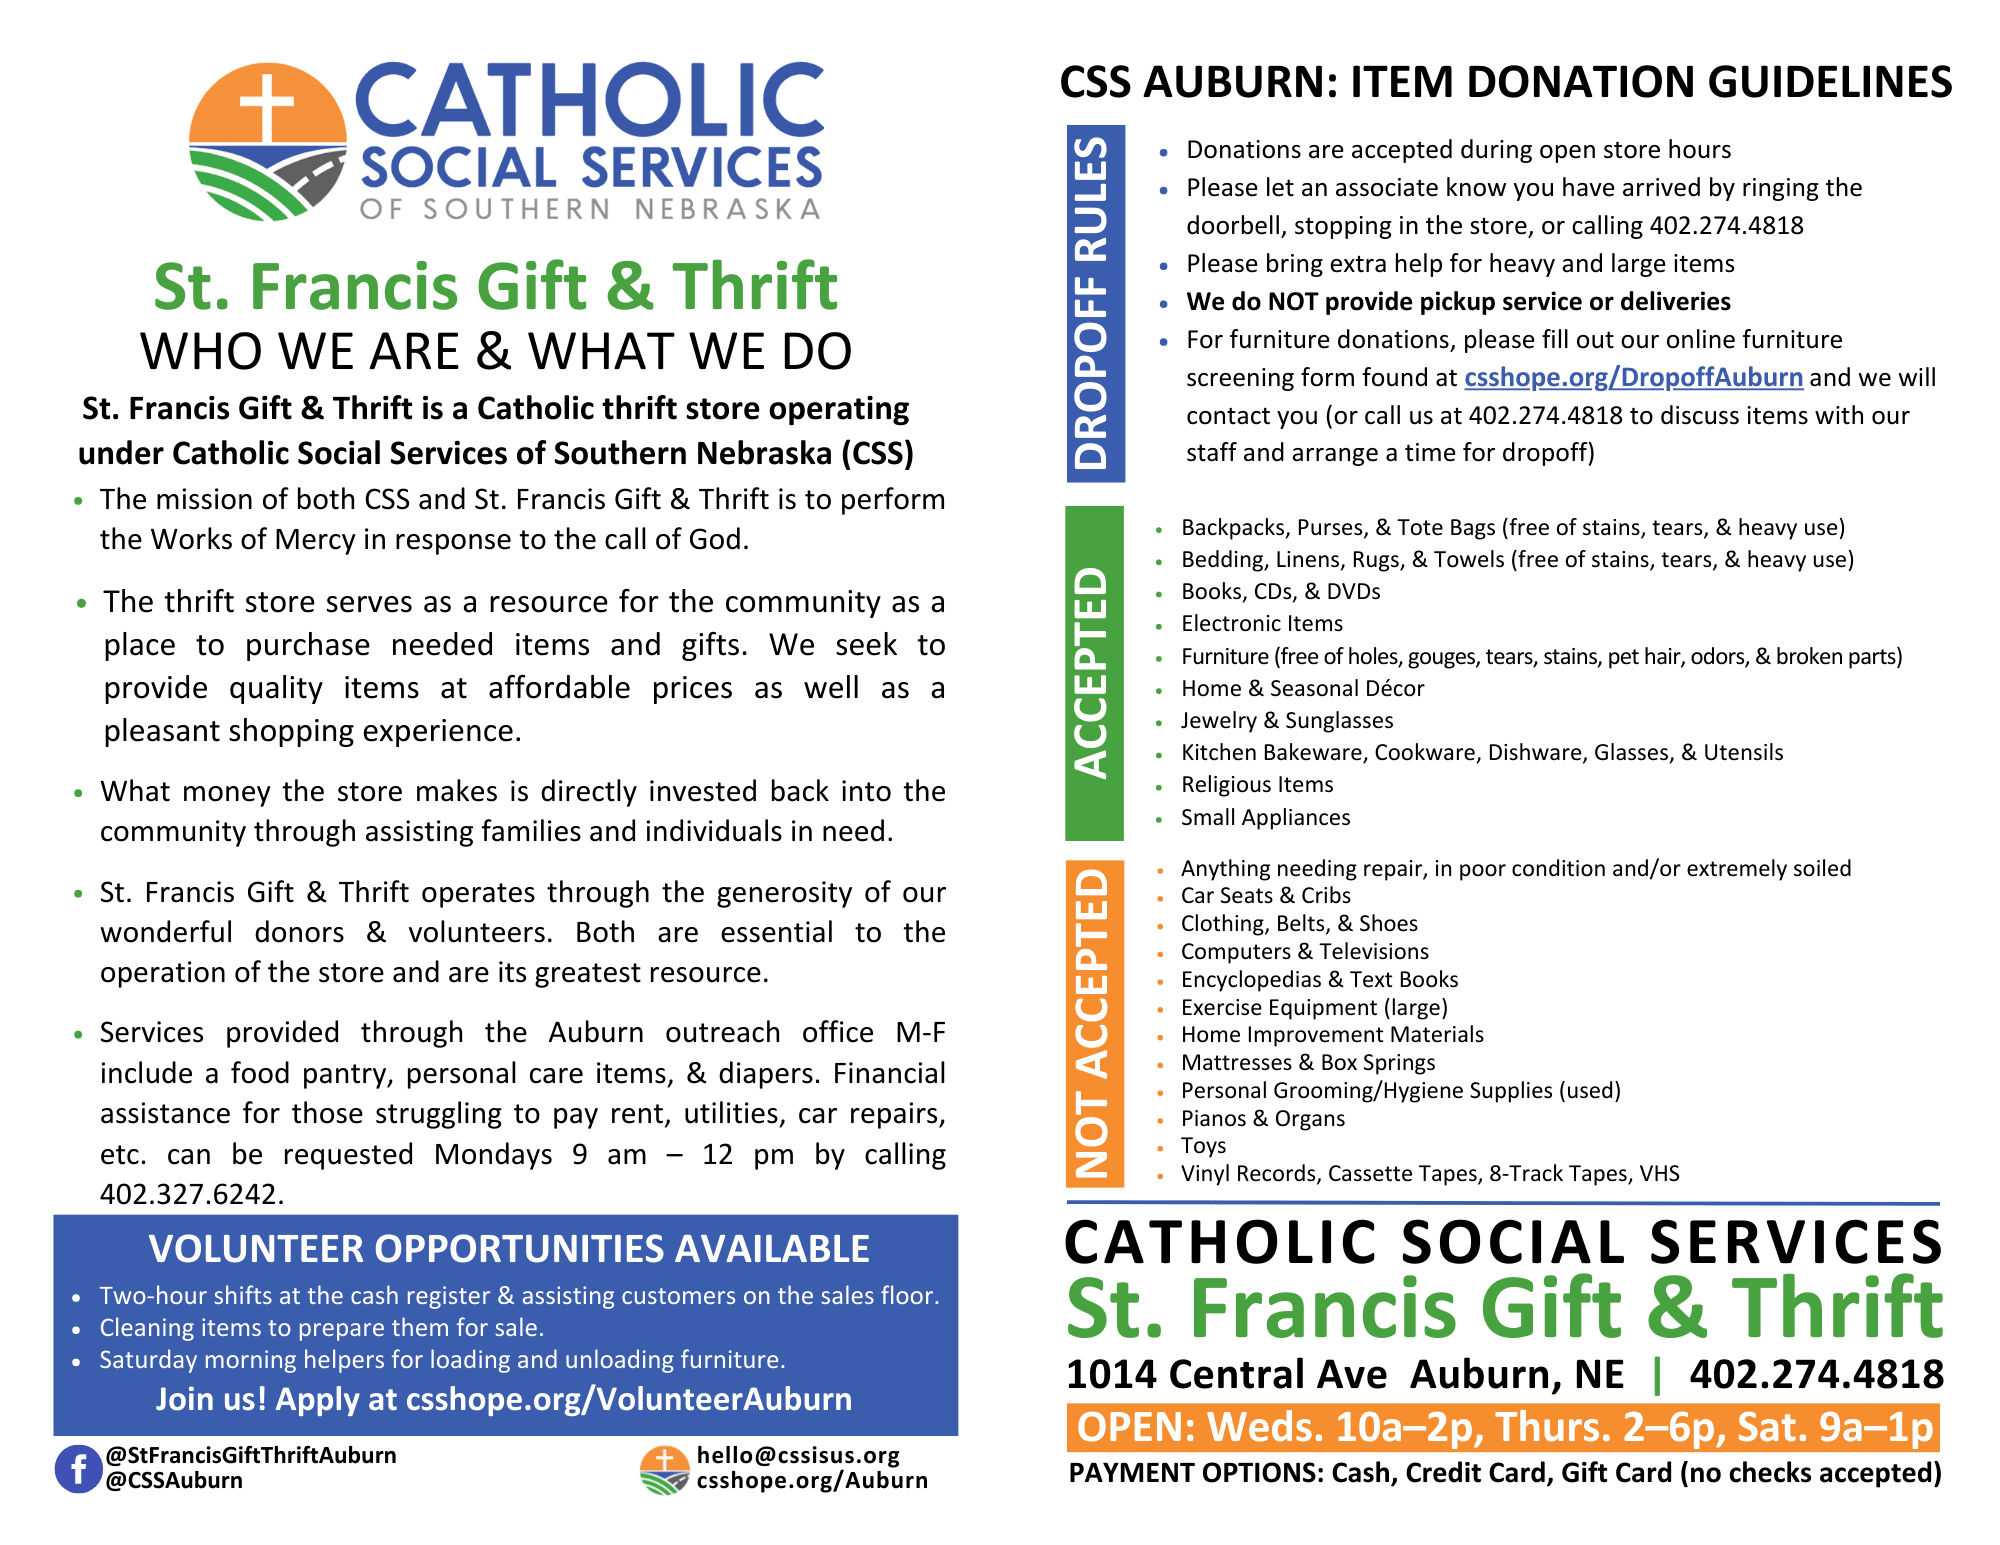 St. Francis Gift & Thrift Item donation guidelines and store information